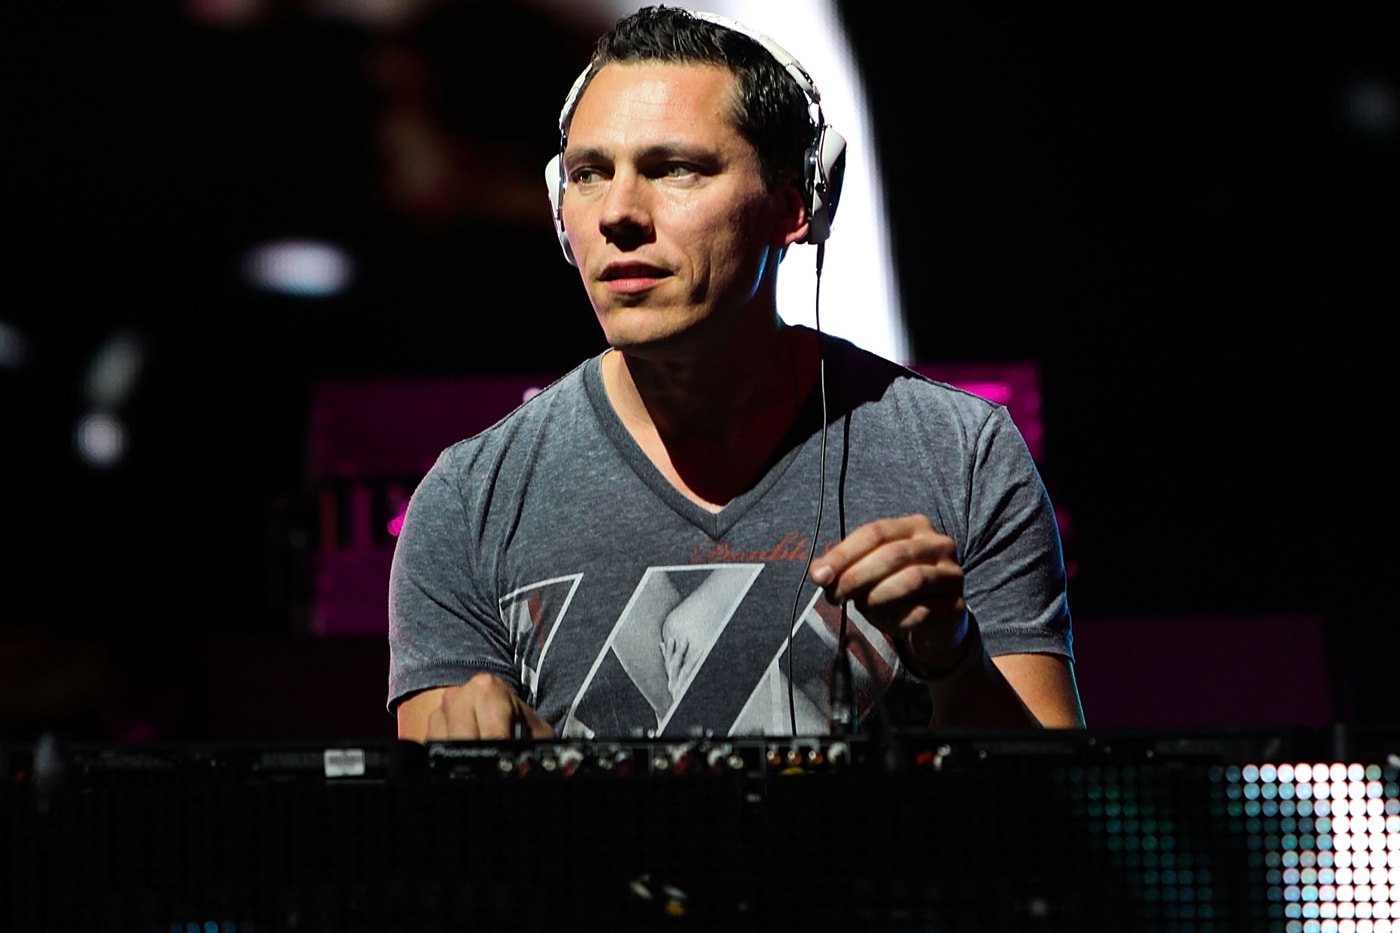 Tiësto featuring Nelly Furtado - Who Wants To Be Alone (Philip D Remix)